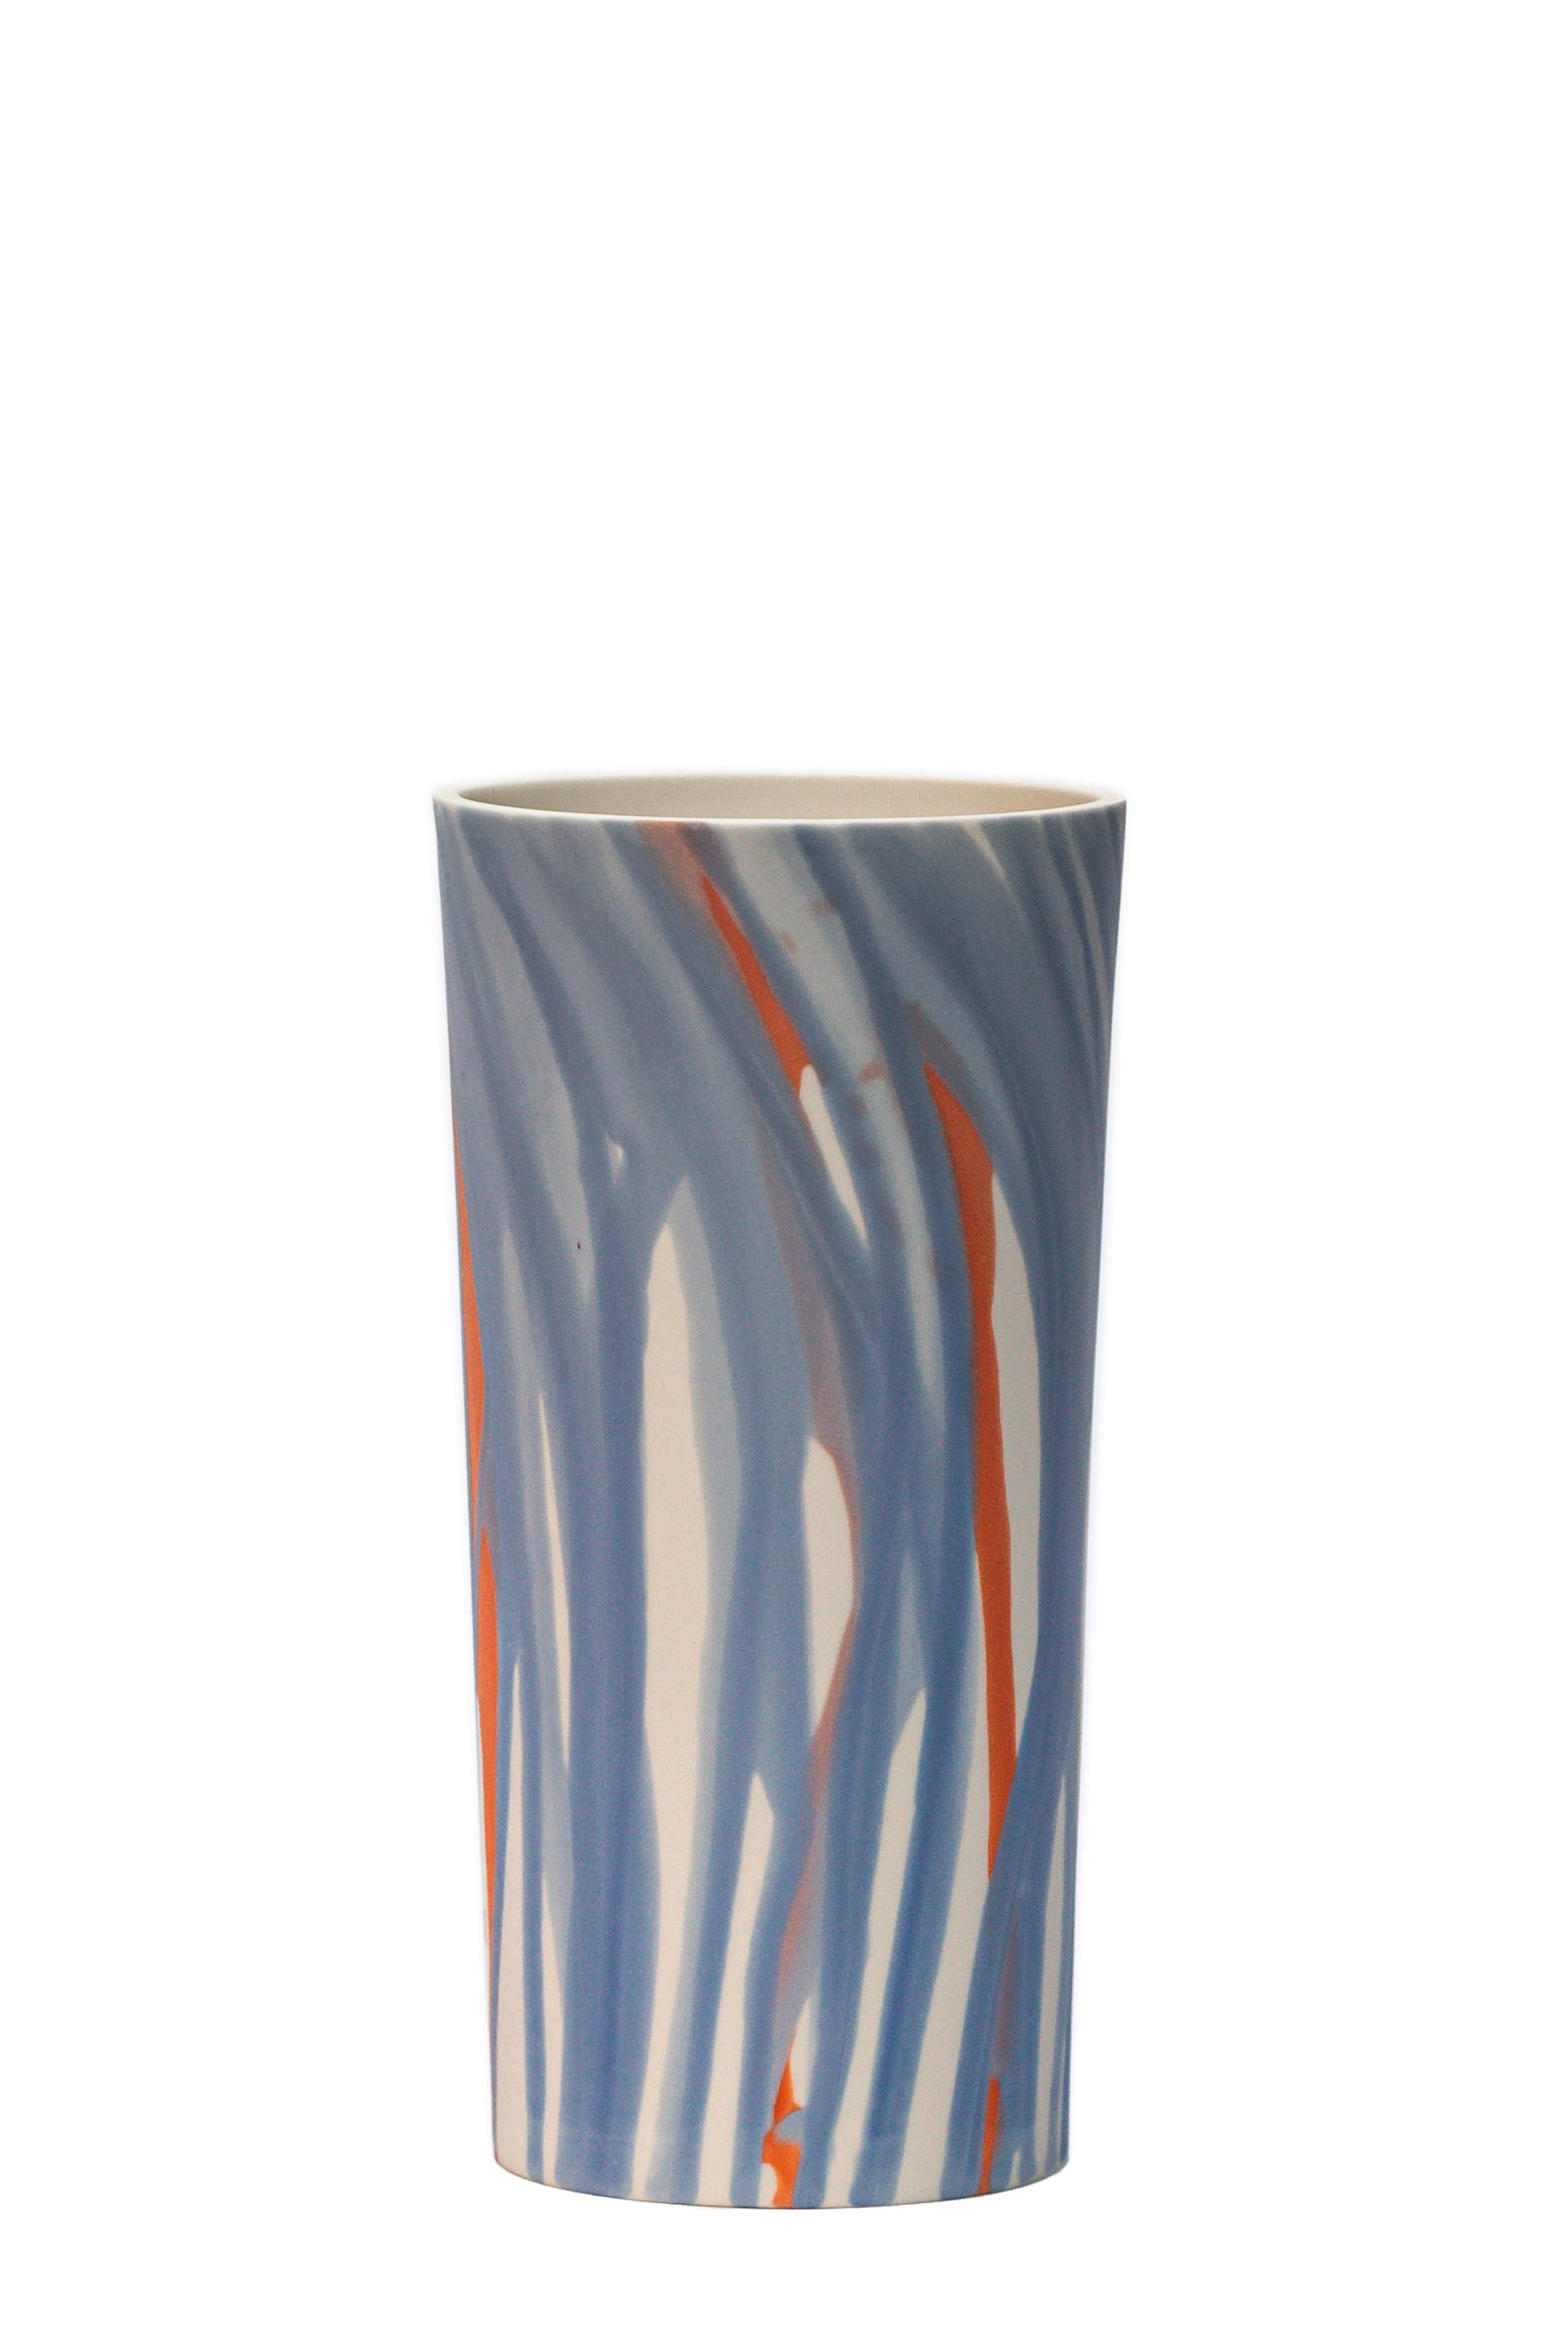 Hand-Painted Salmon and Sky Porcelain Vase Unique Parianware Contemporary 21st Century UK For Sale